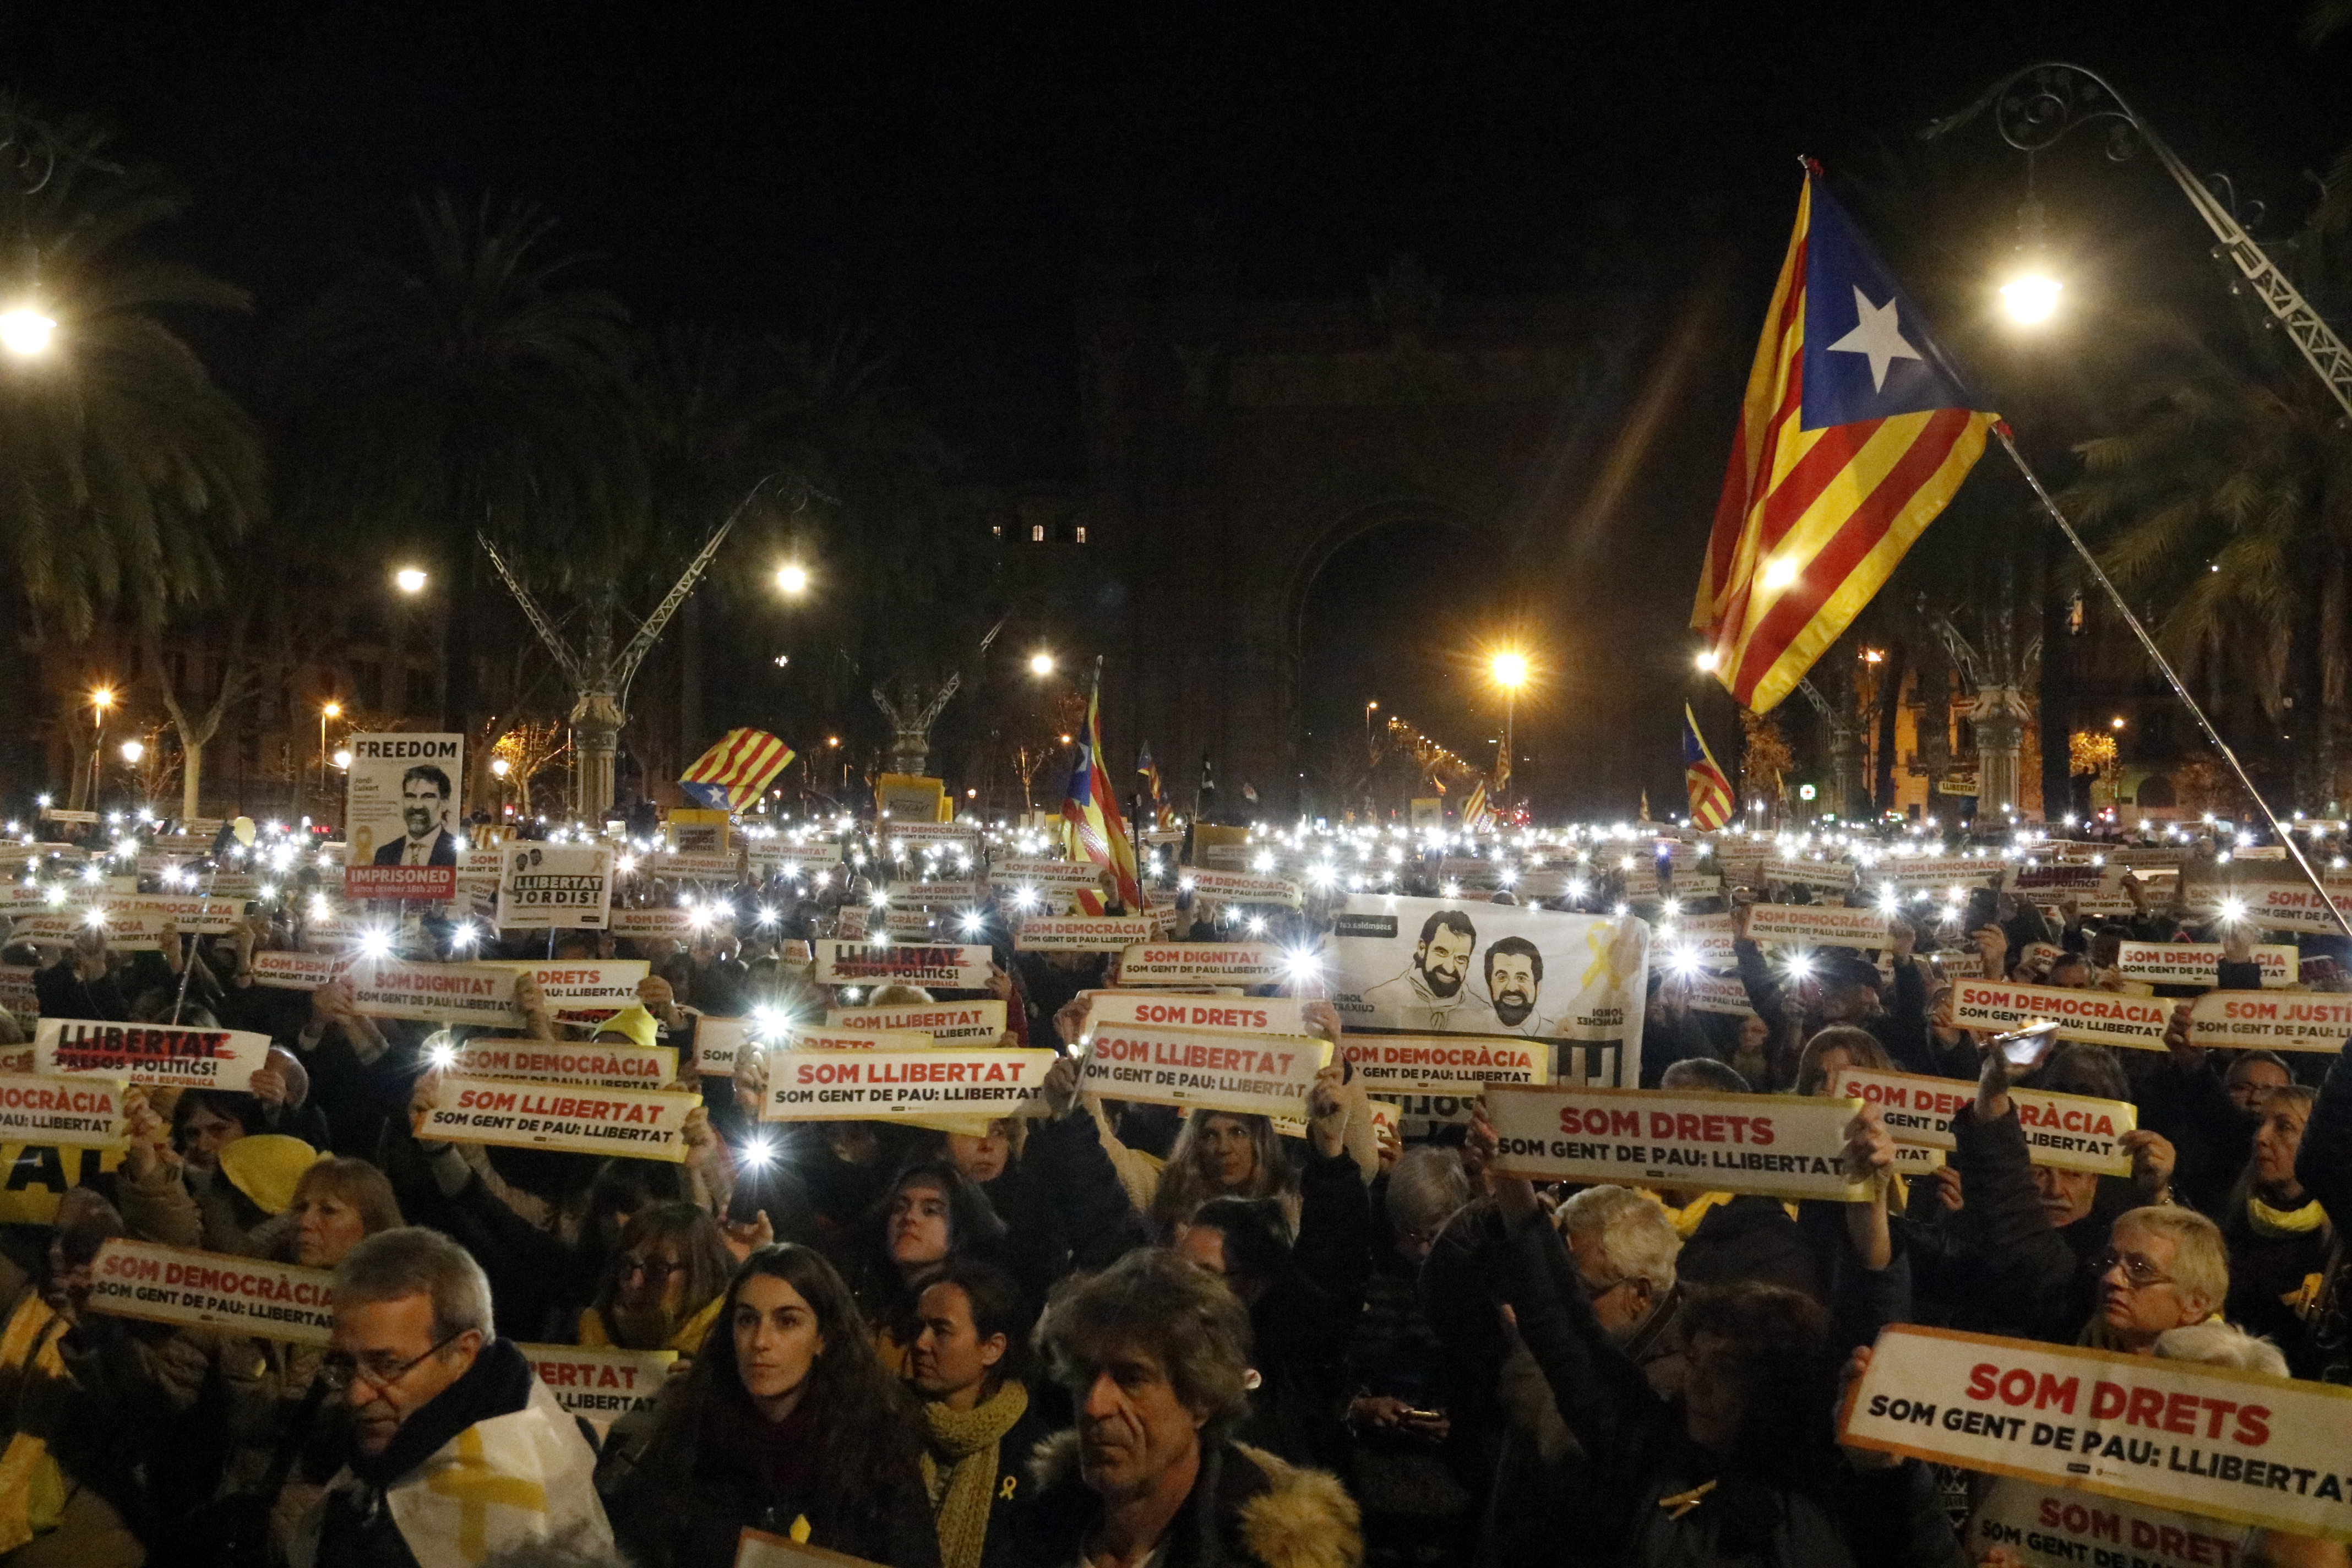 Demonstration participants in Barcelona demand the freedom of Jordi Cuixart and Jordi Sànchez on January 16 2018 (by Laura Fíguls)